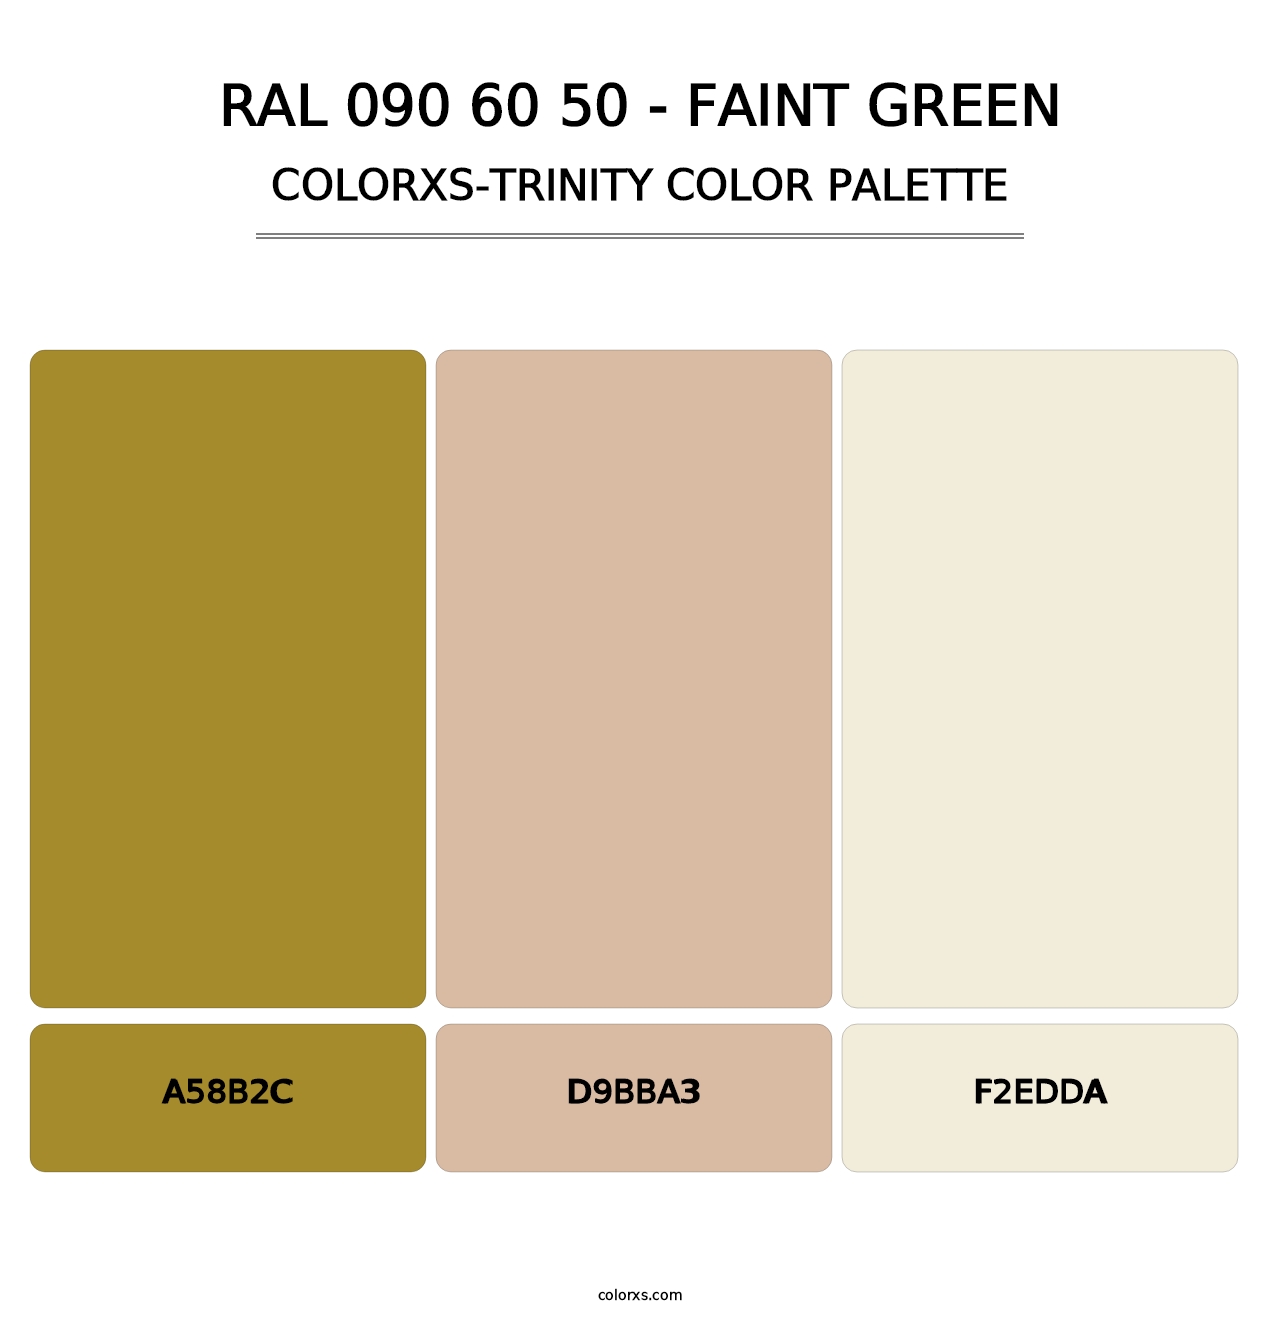 RAL 090 60 50 - Faint Green - Colorxs Trinity Palette